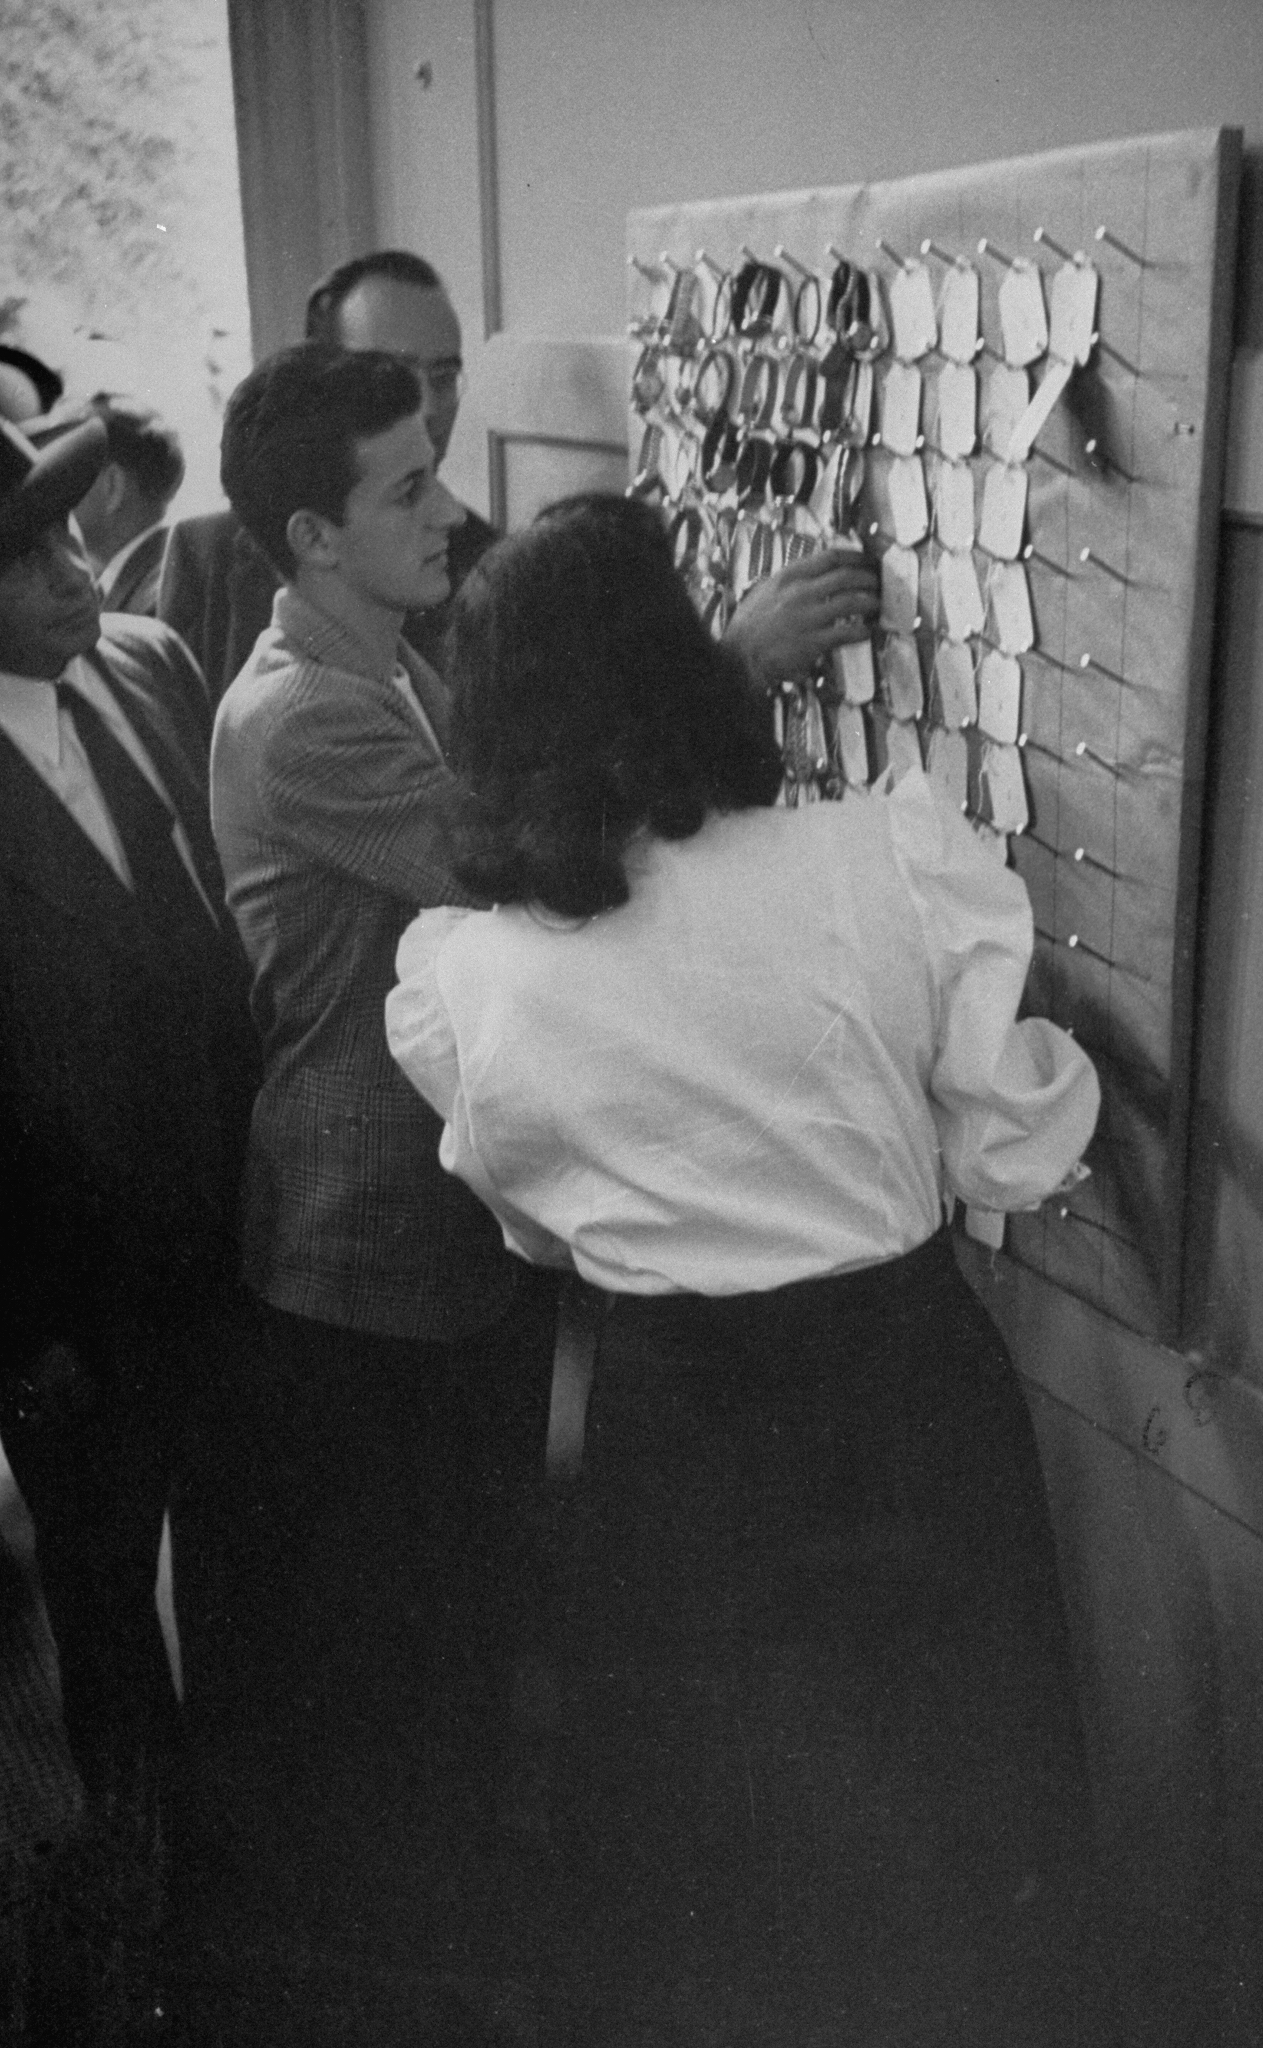 Before entering the christening ceremonies for Columbia University's cyclotron in 1948, guests check their watches to guard against the machine's enormous magnetic pull.